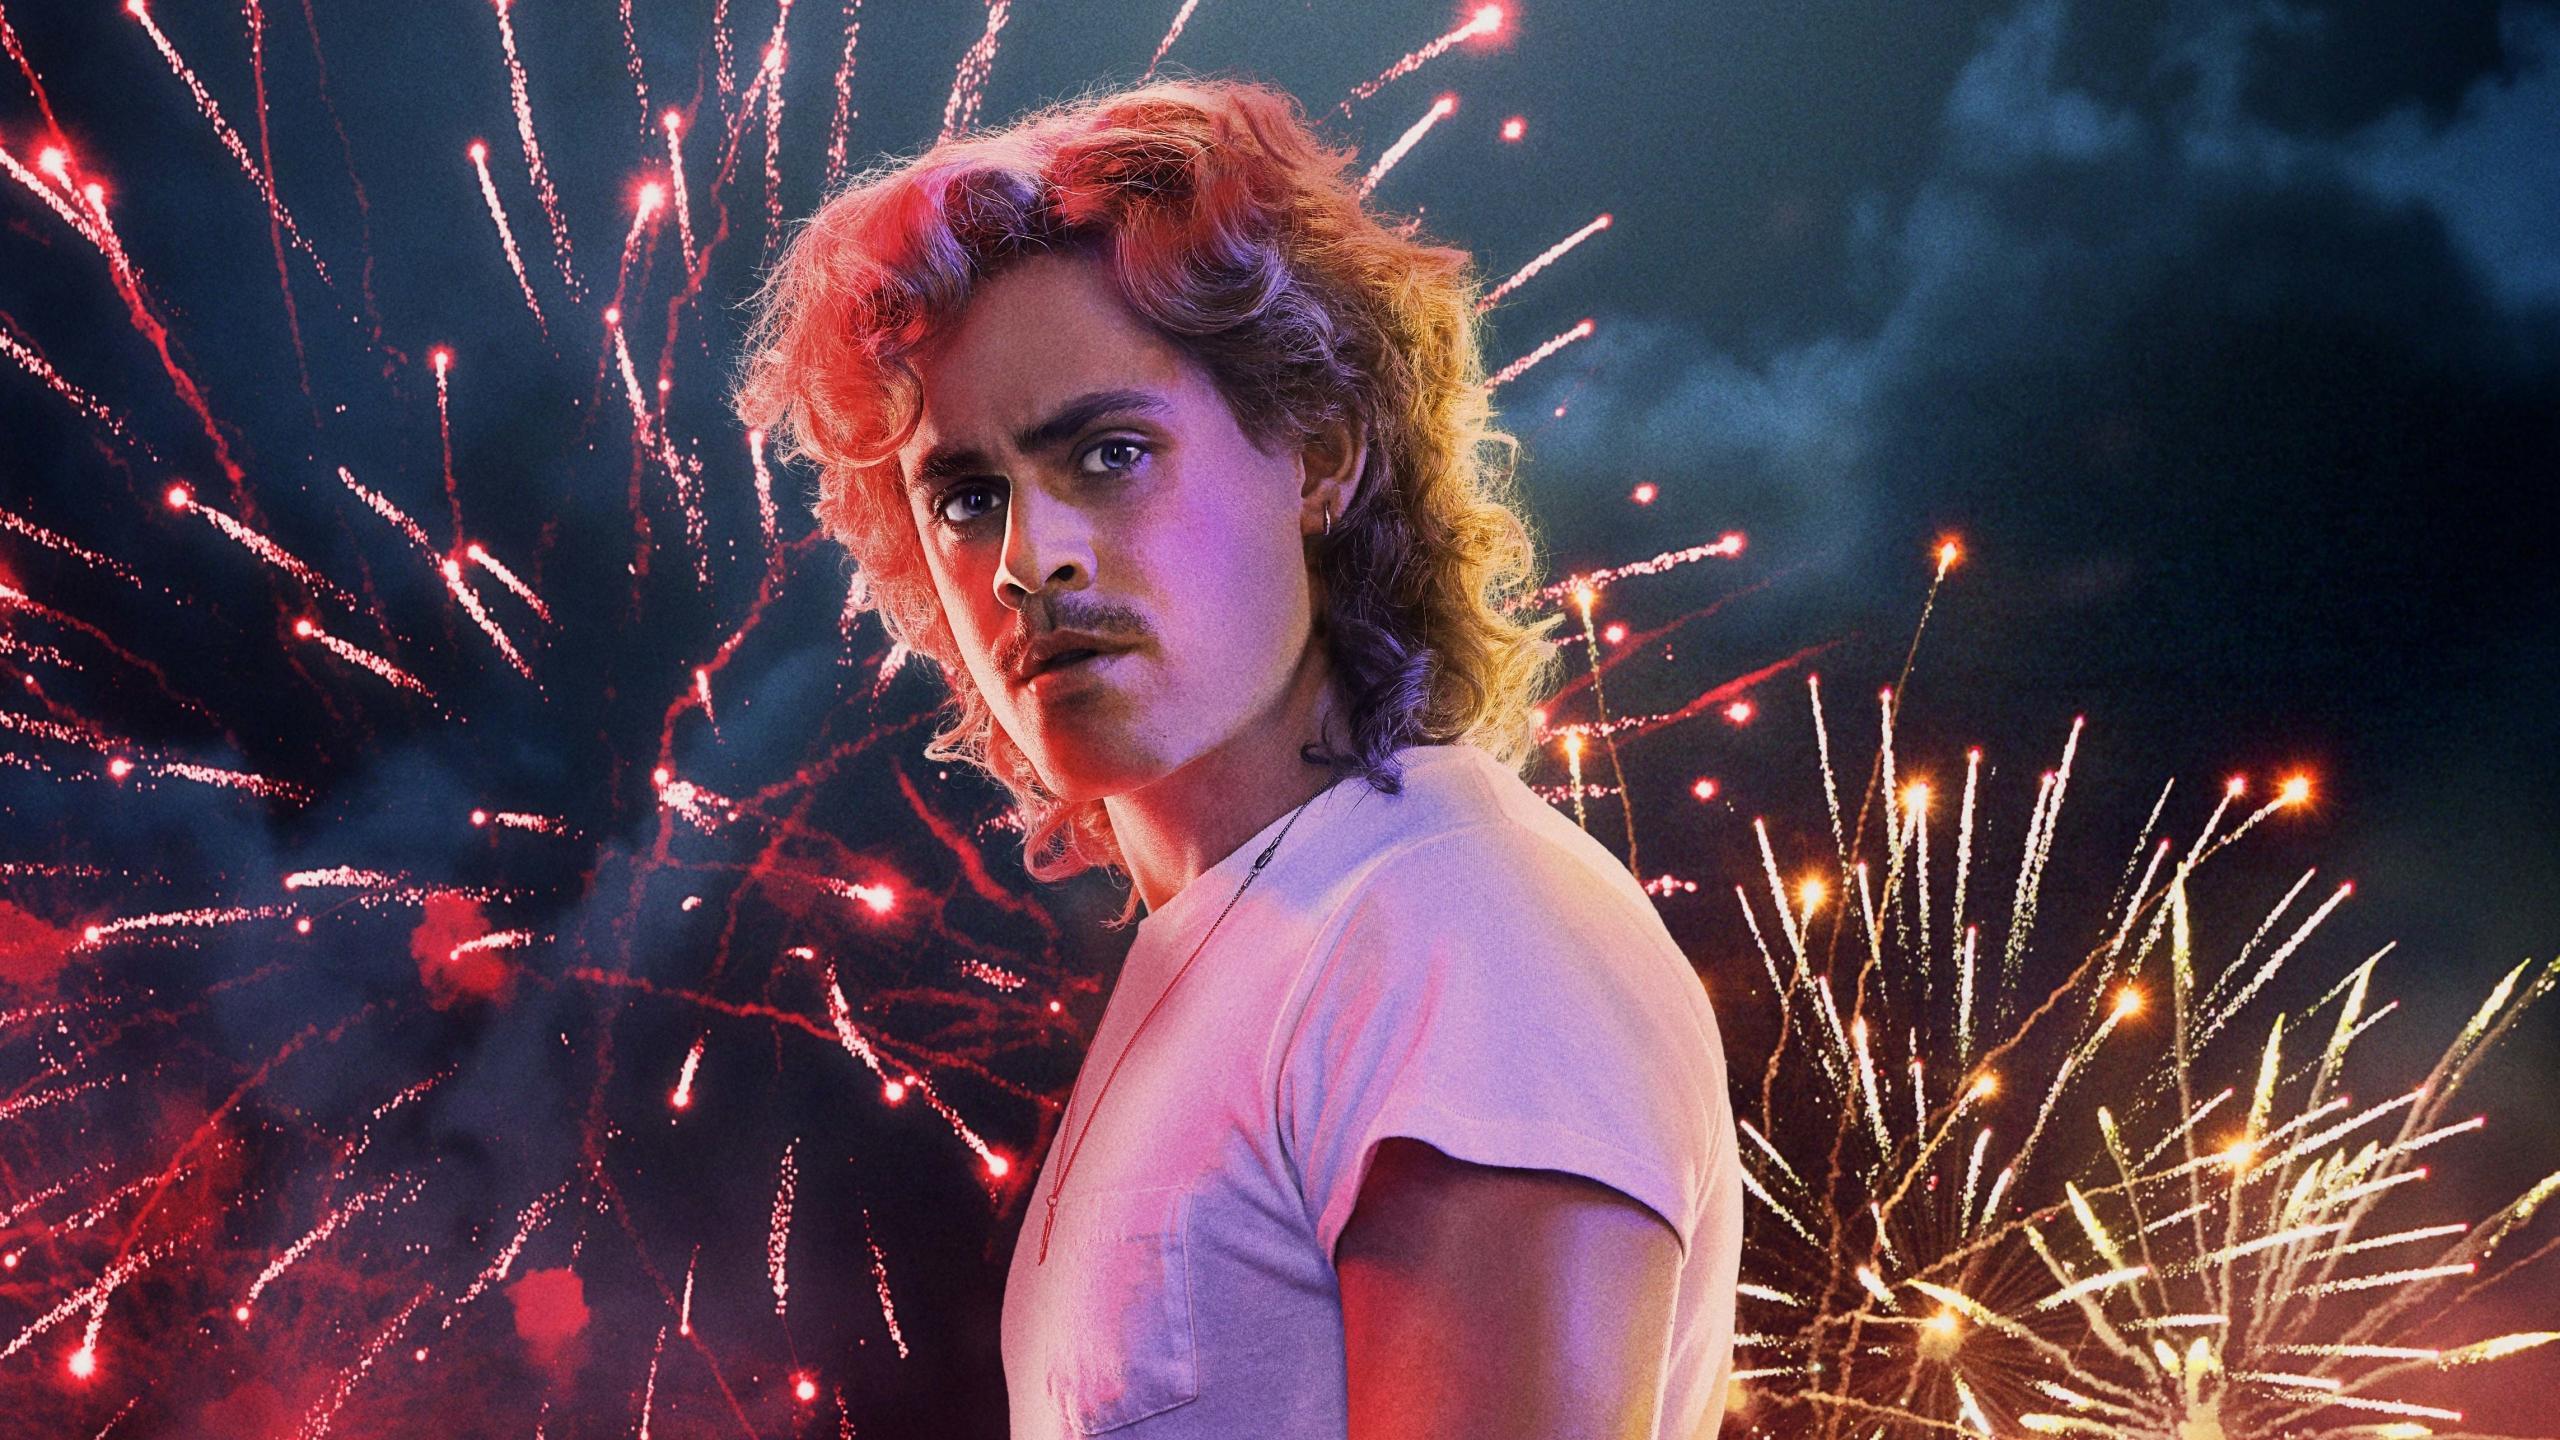 Dacre Montgomery Stranger Things 3 Poster 1440P Resolution